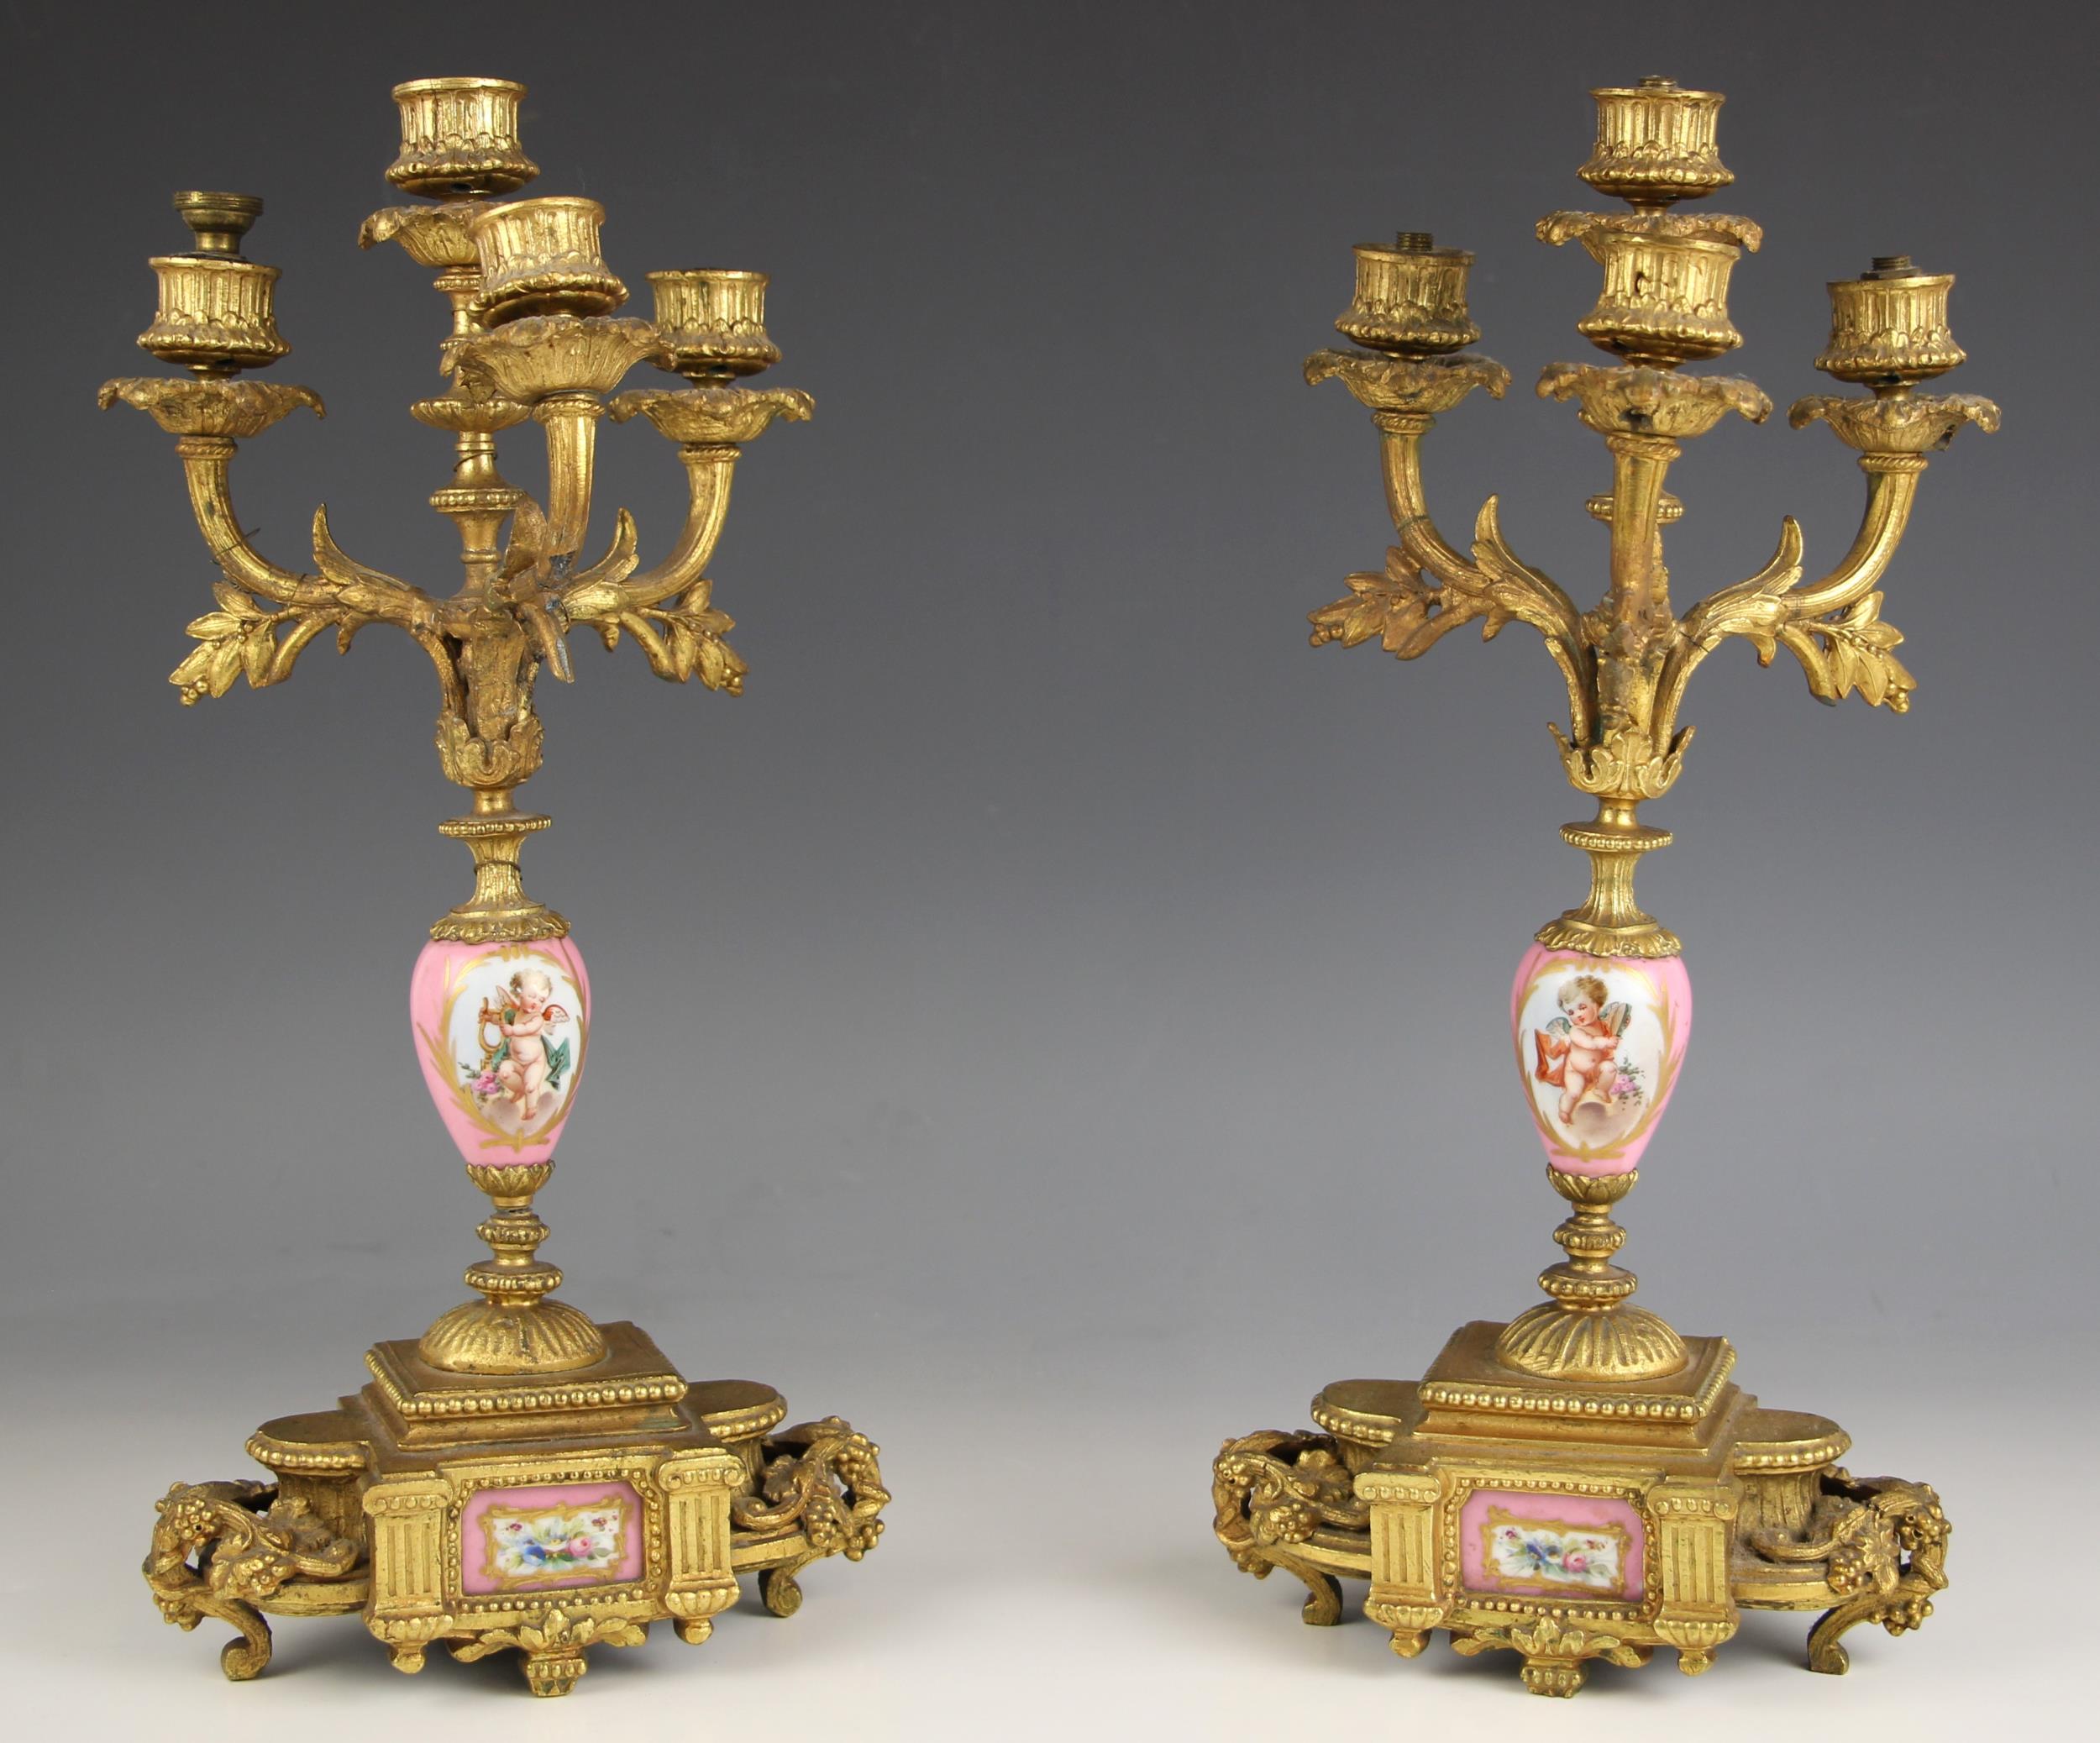 A pair of French porcelain and ormolu Rococo style candelabra, 19th century, the Sevres style